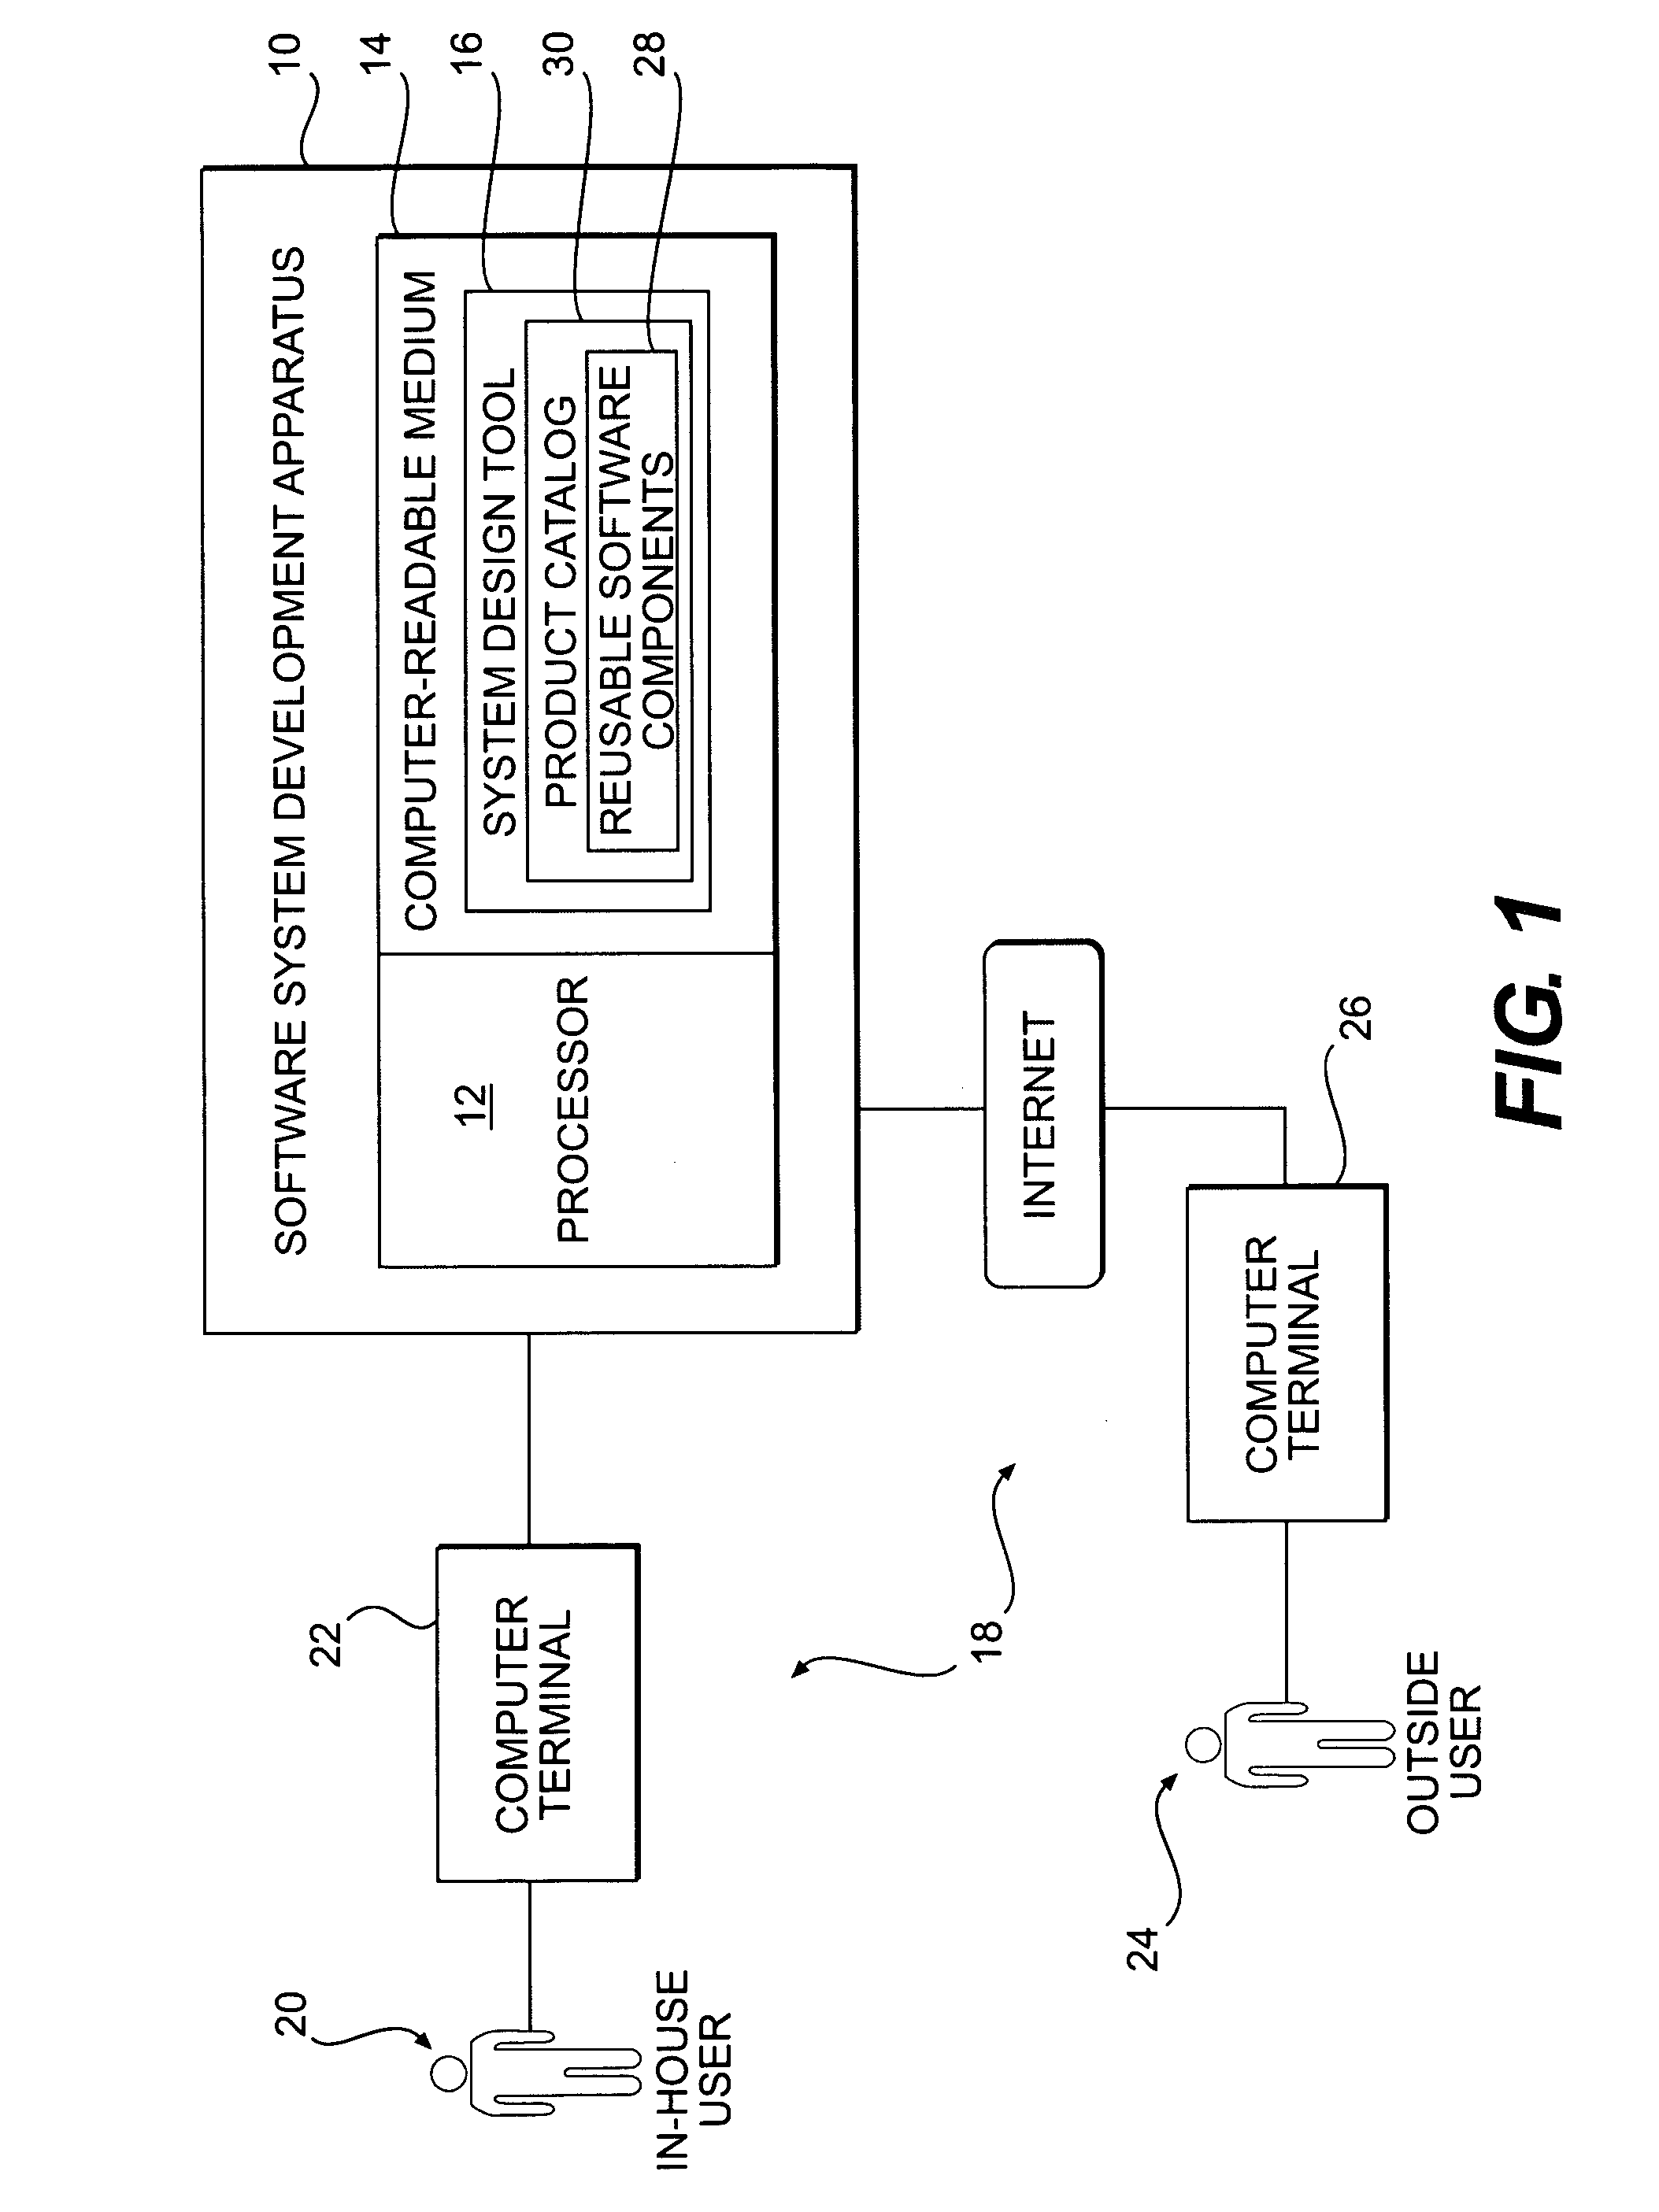 Software development apparatus with regulated user access